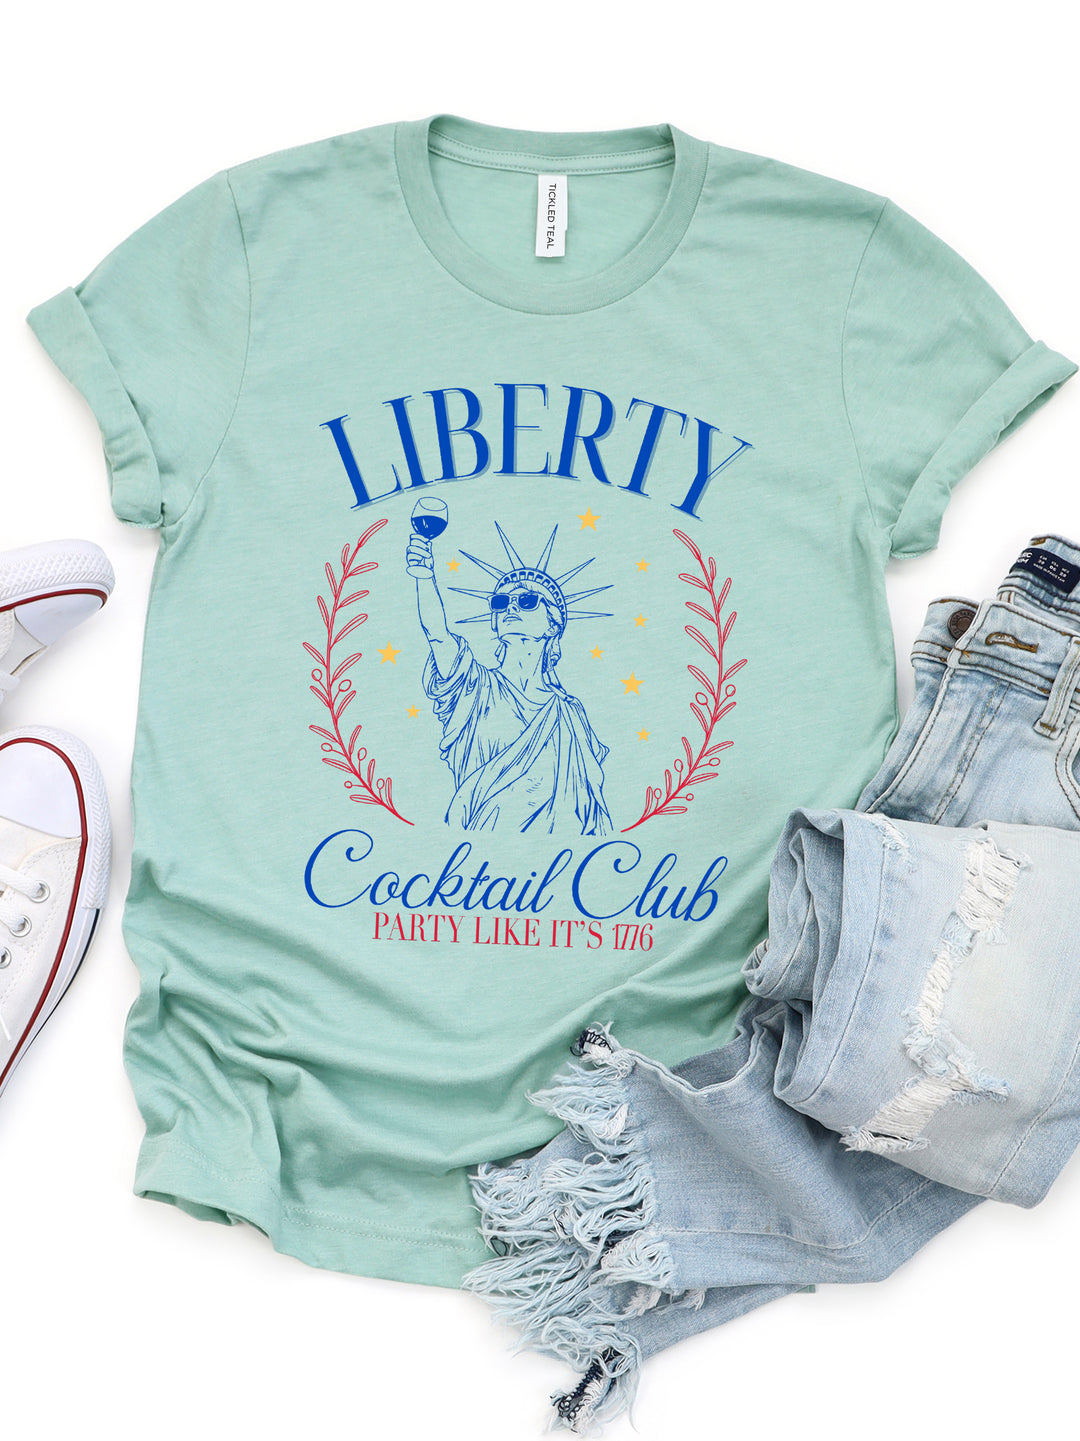 Liberty Cocktail Club Graphic Tee